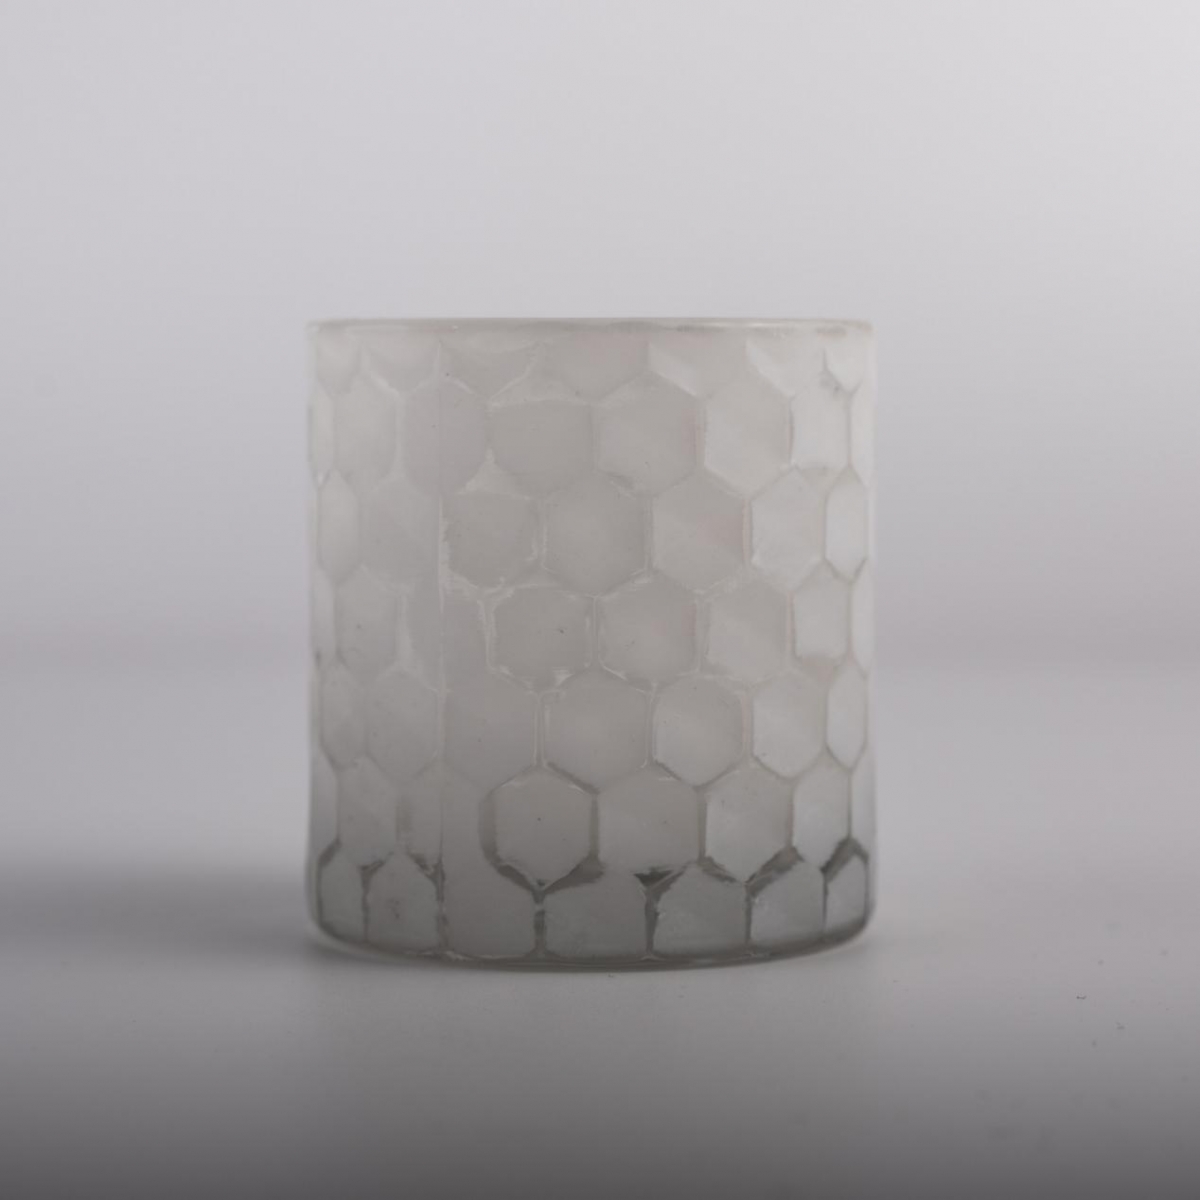 Candle Holder ：Honeycomb Glass Jar , Polished Color ,Ceramic White , Home Sweet Home , China Factory Price-HOWCANDLE-Candles,Scented Candles,Aromatherapy Candles,Soy Candles,Vegan Candles,Jar Candles,Pillar Candles,Candle Gift Sets,Essential Oils,Reed Diffuser,Candle Holder,